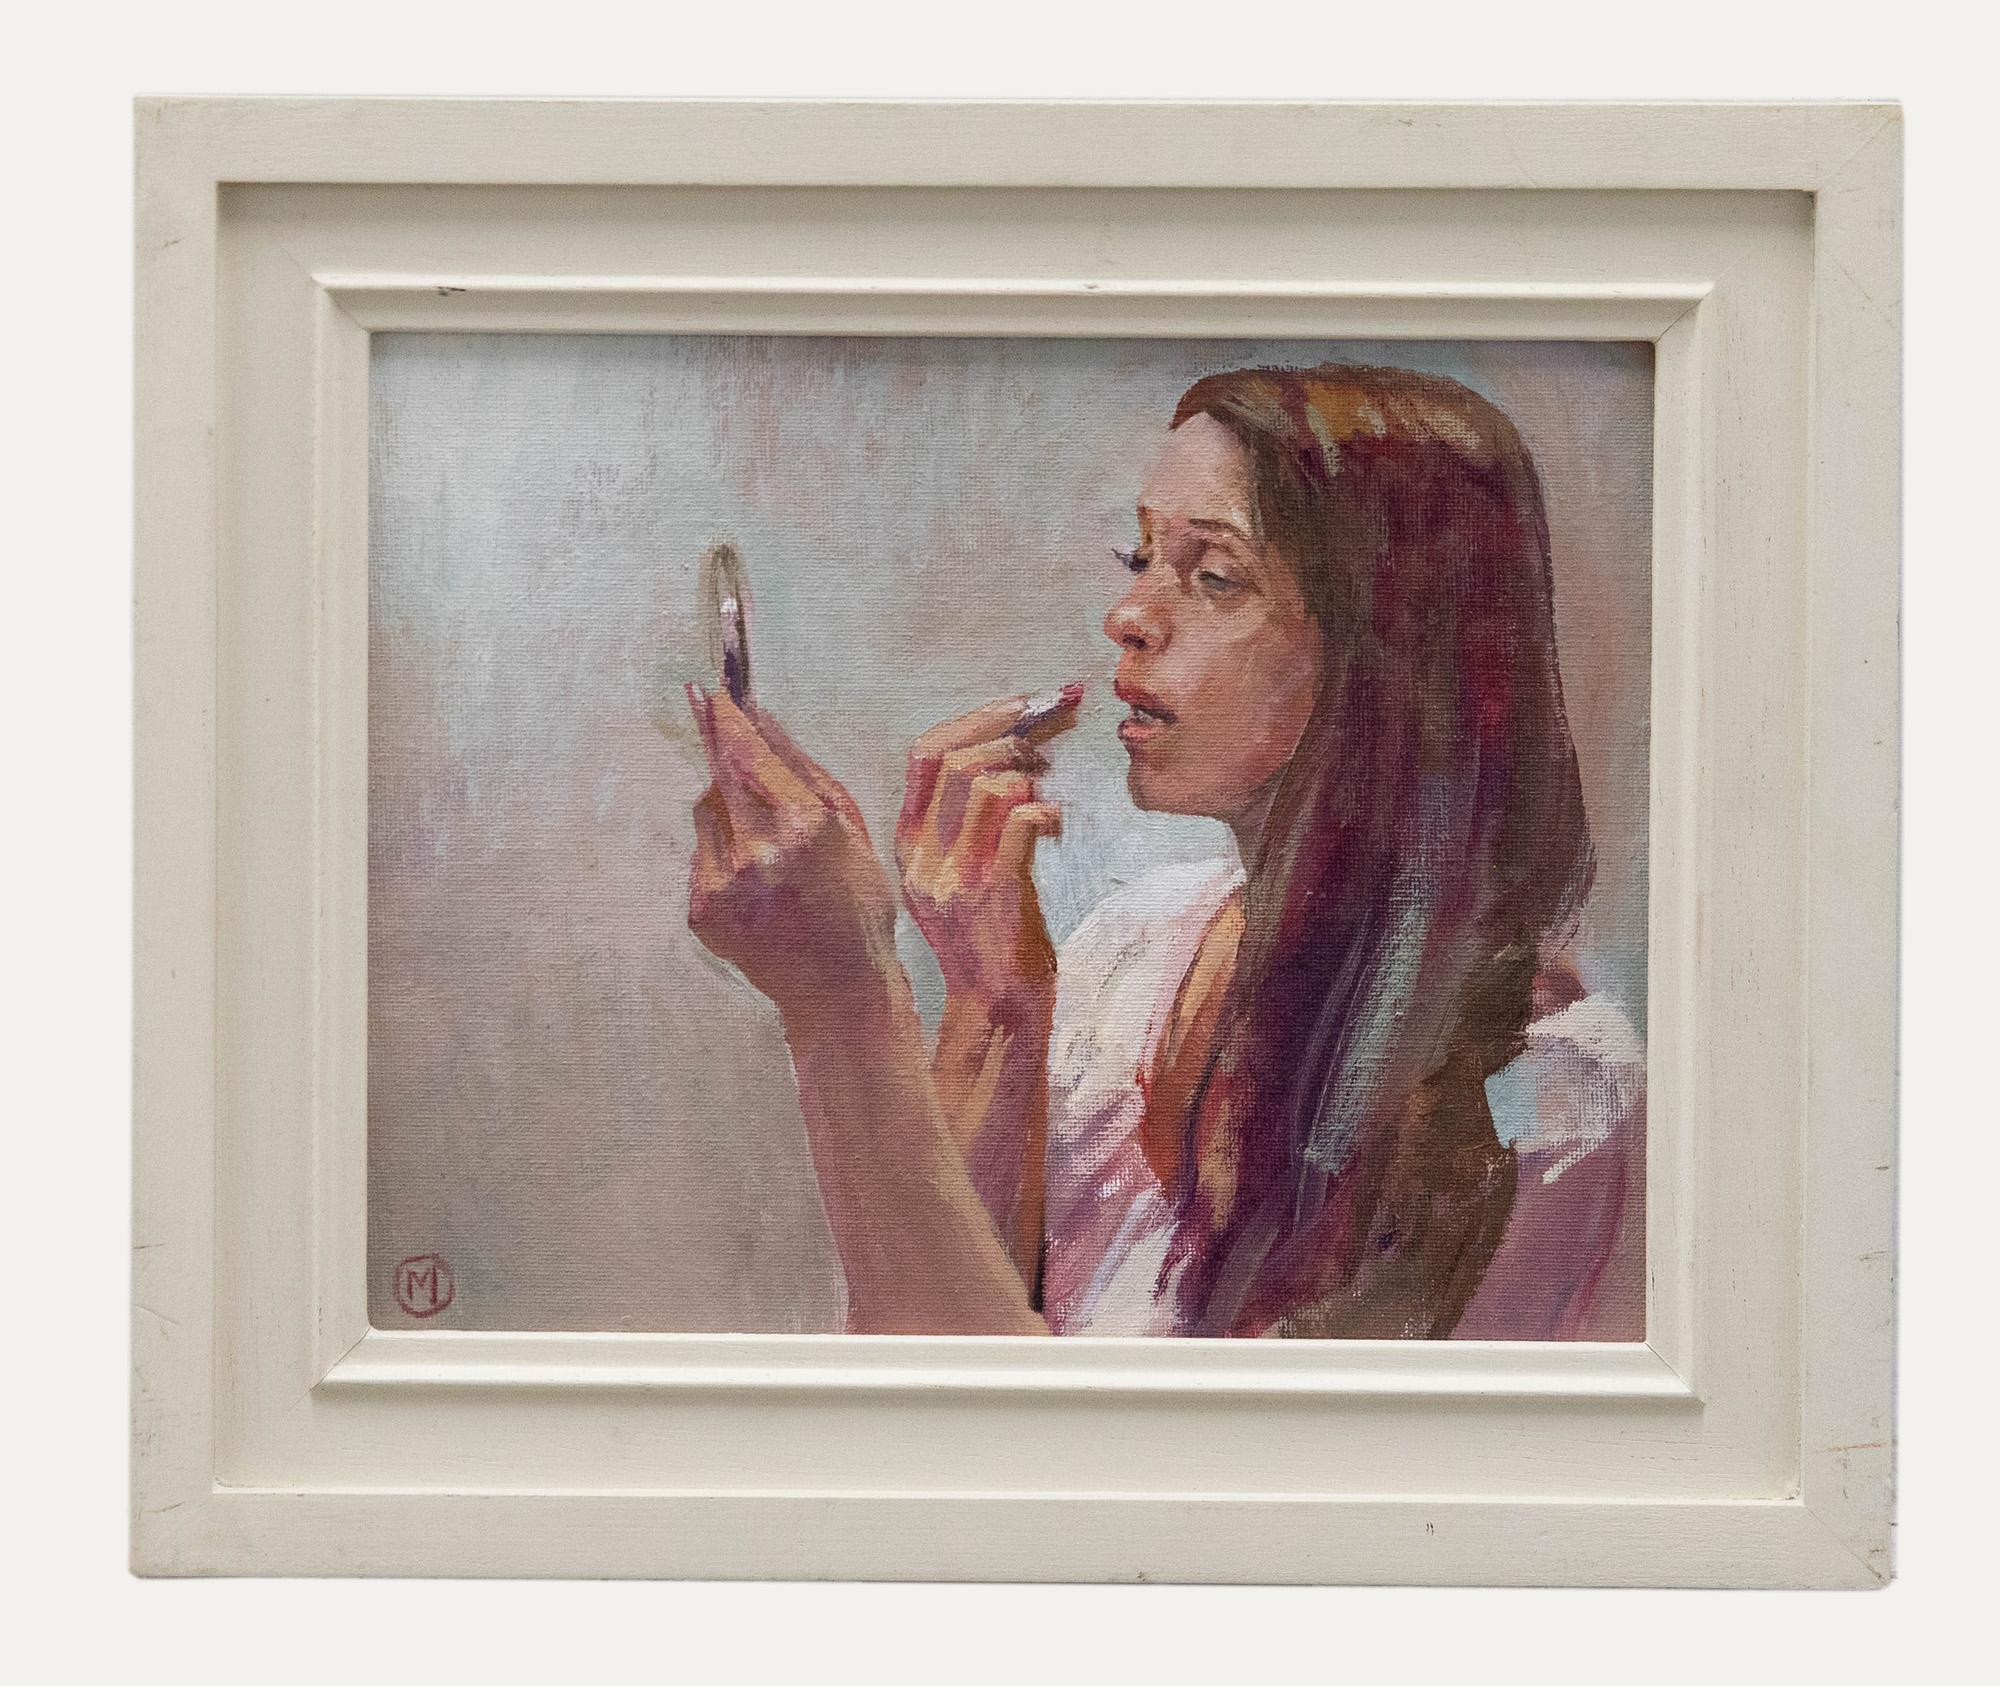 A charming oil study depicting a woman applying lipstick using a compact mirror. Signed with a monogram to the lower left. Presented in a wooden frame. On board.